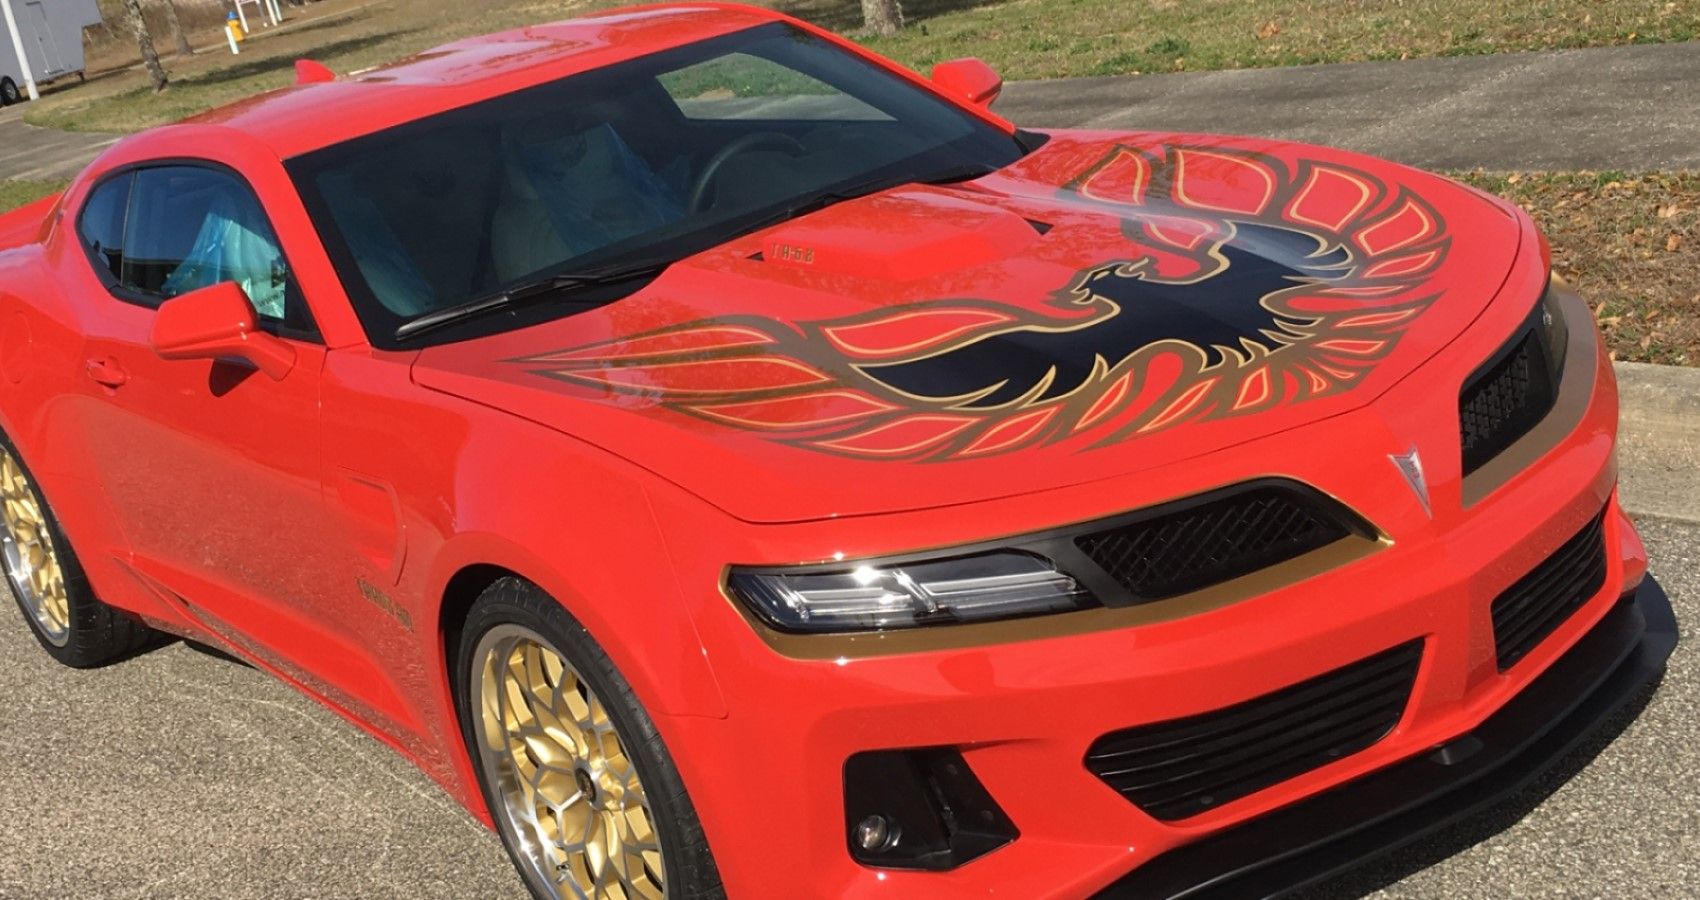 pics of the new trans am